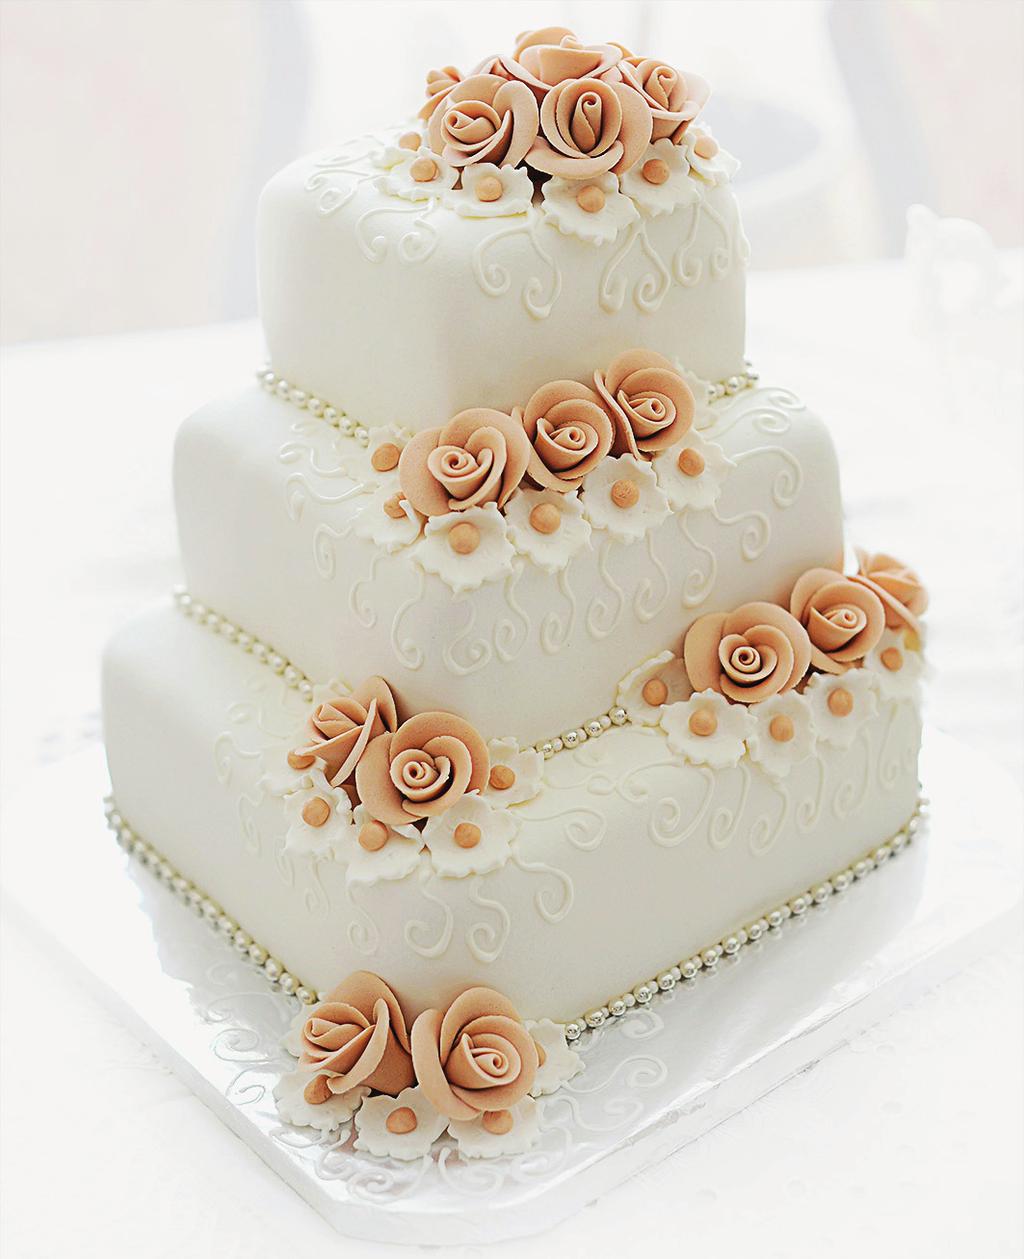 Ask us about your Wedding Cake. We can make a Wedding Cake to your perfectly compliment your big day. Talk to our chefs.. catering@lipscombelarder.